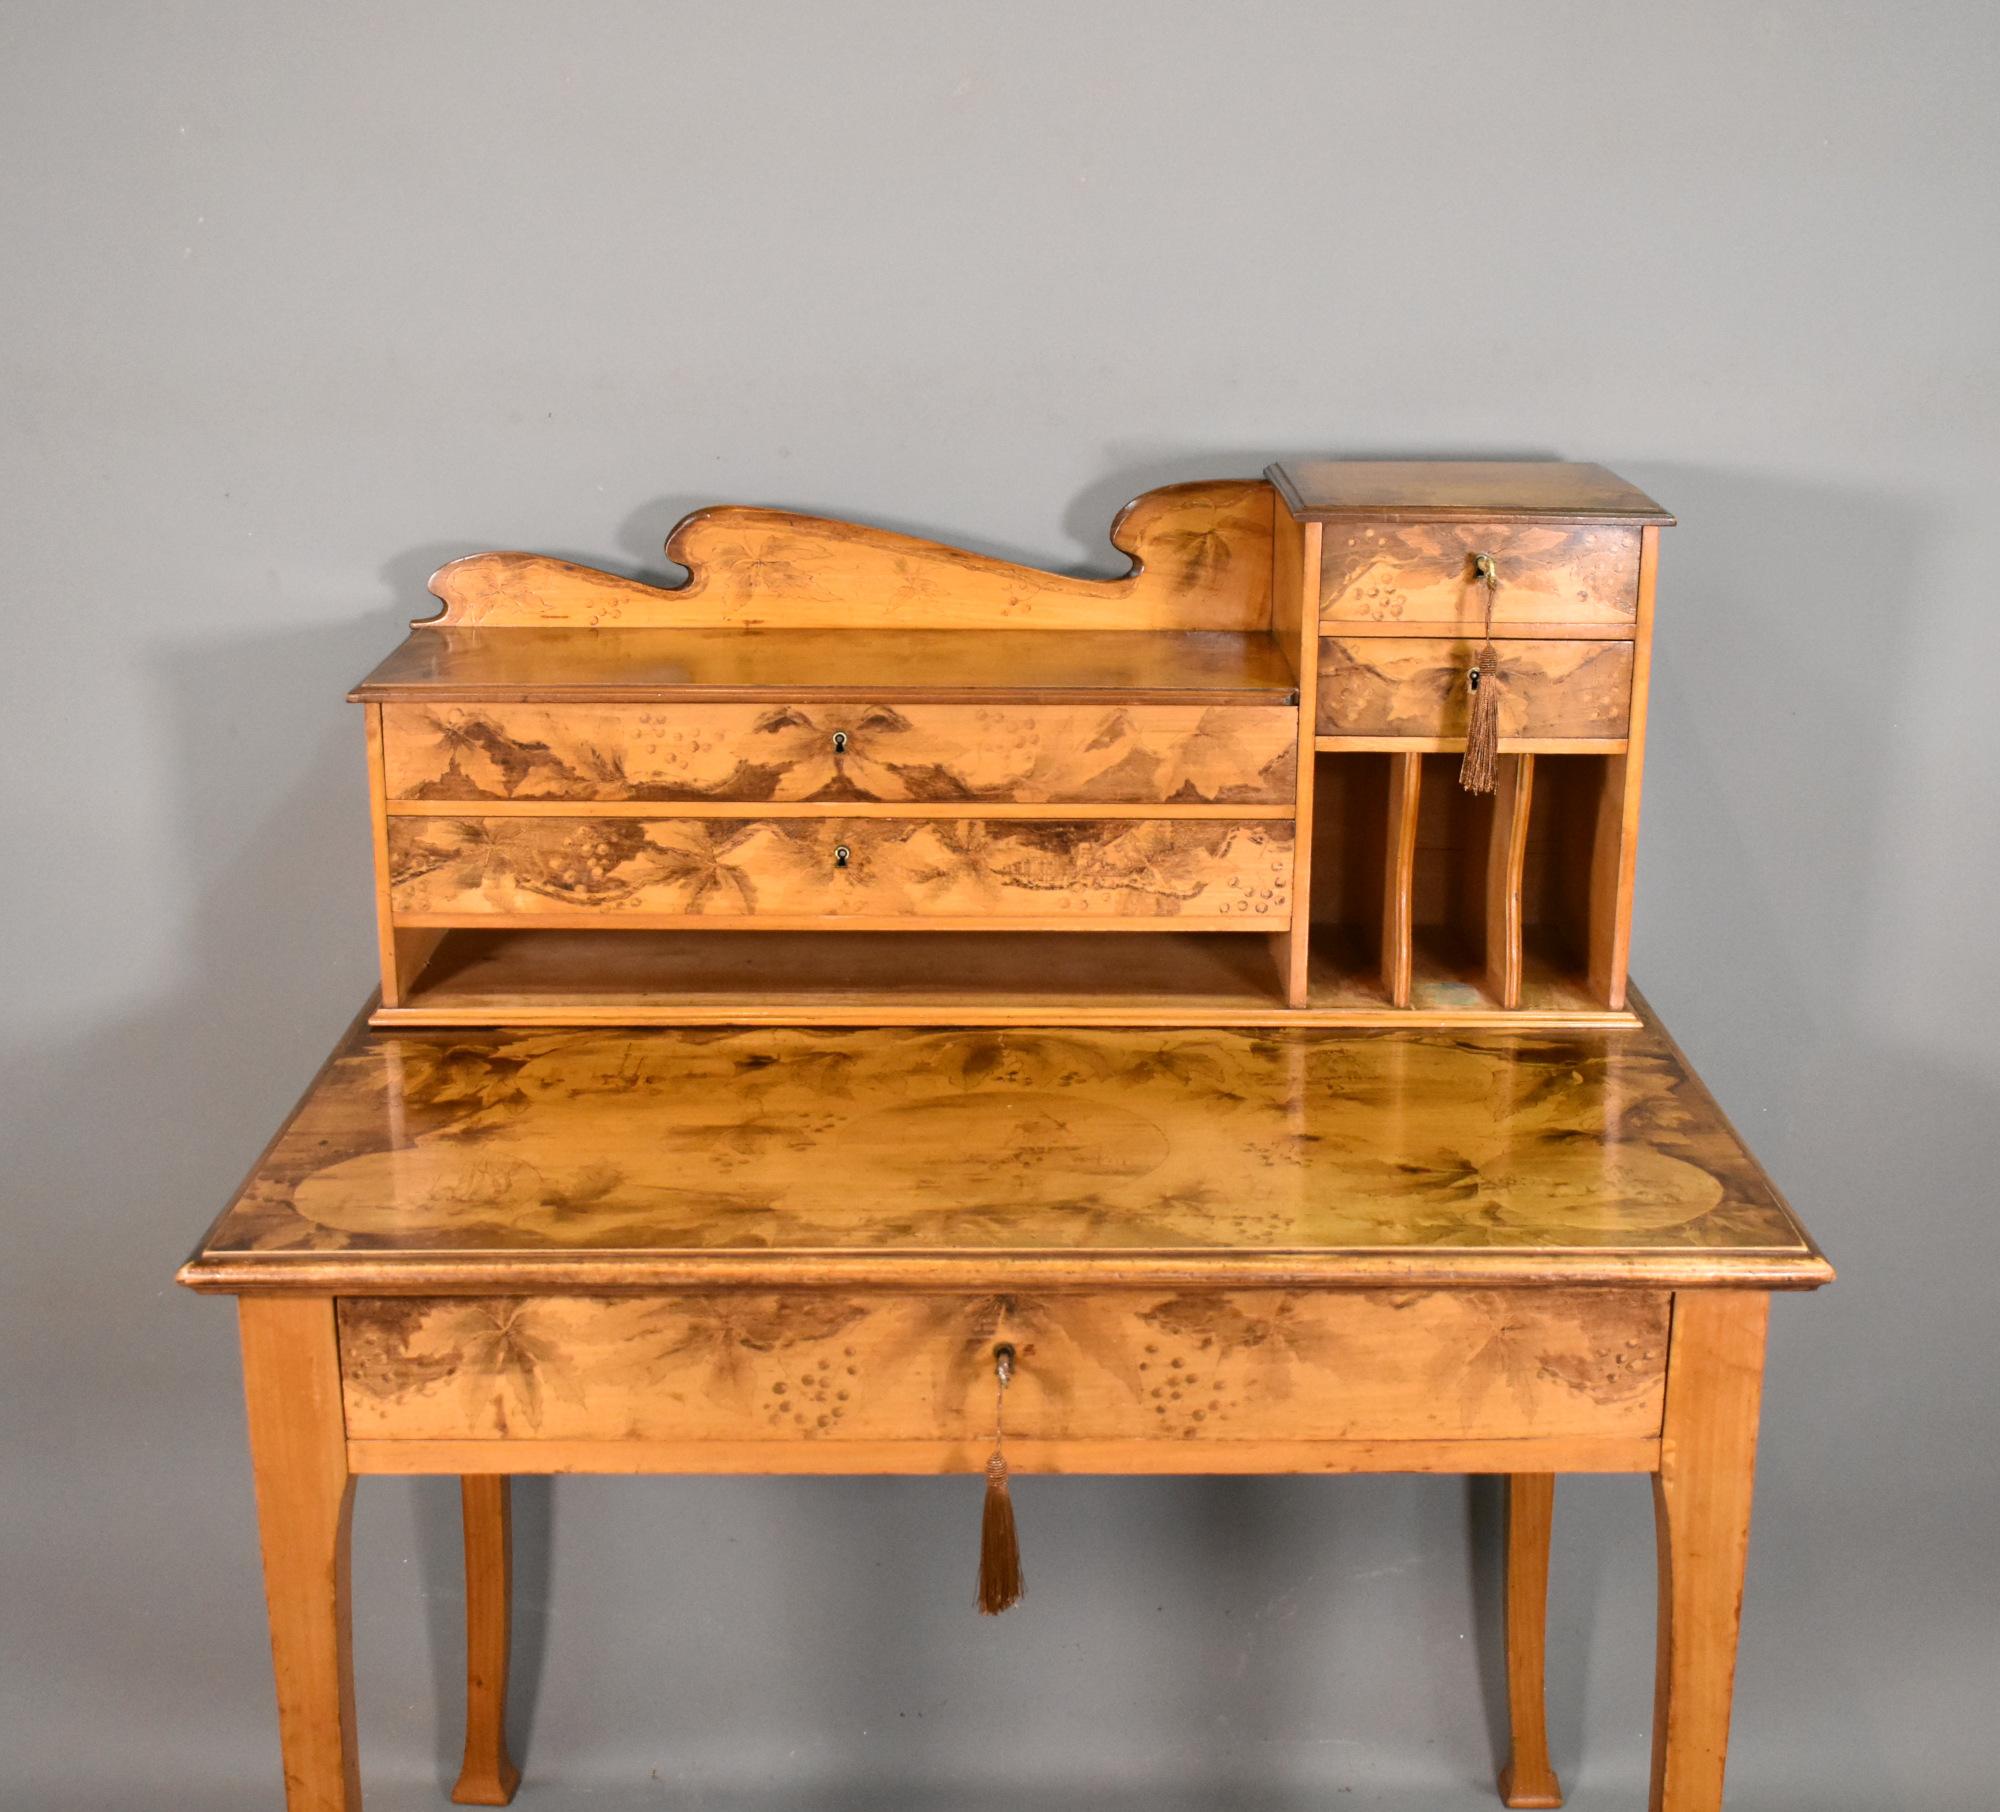 19th Century Art Nouveau Tiered Pyrography Etched Desk